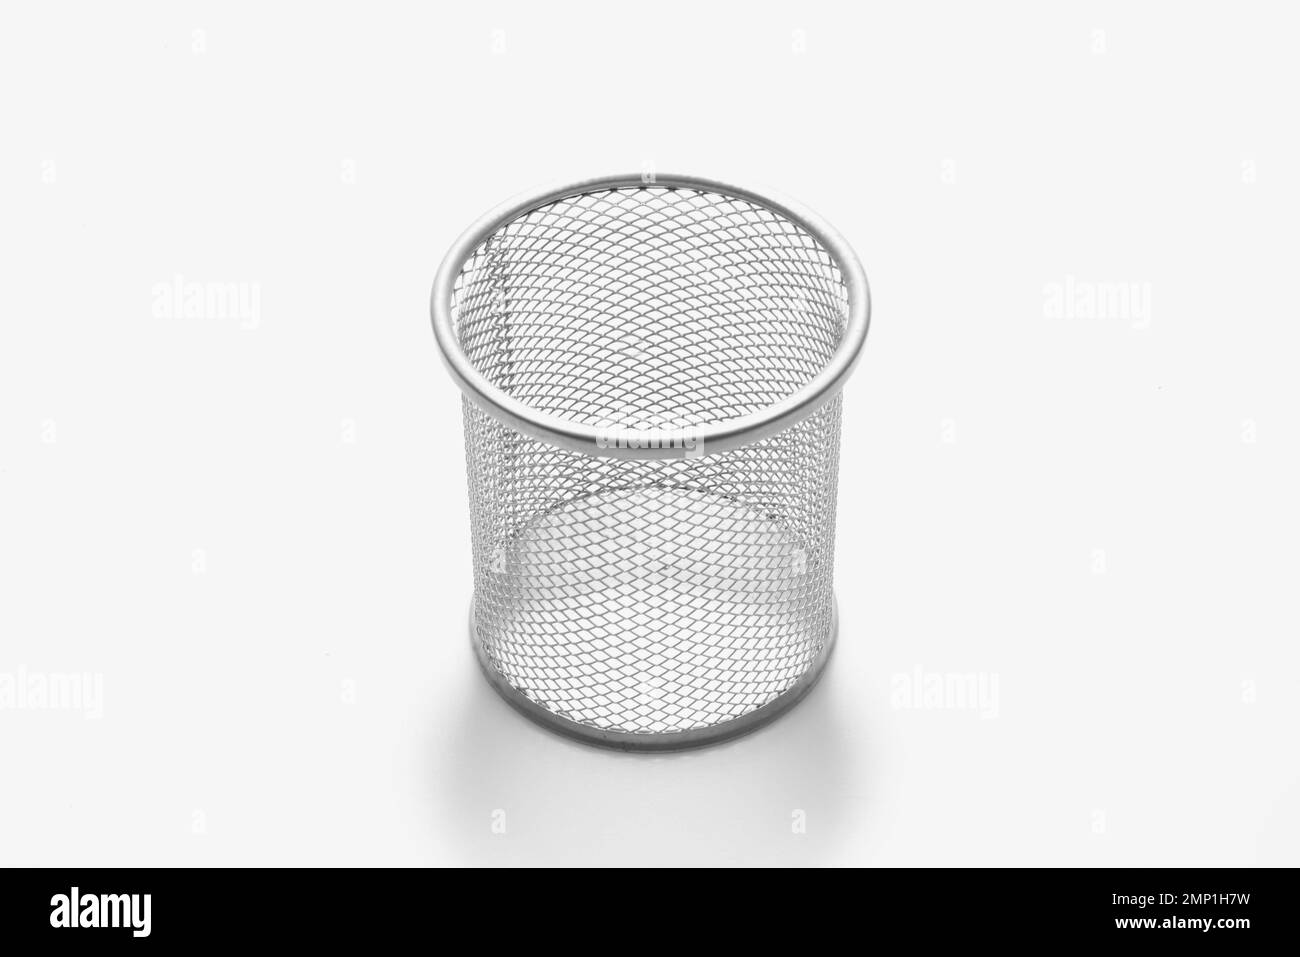 Empty metal trashcan, garbage bin in silver color isolated on white background Stock Photo